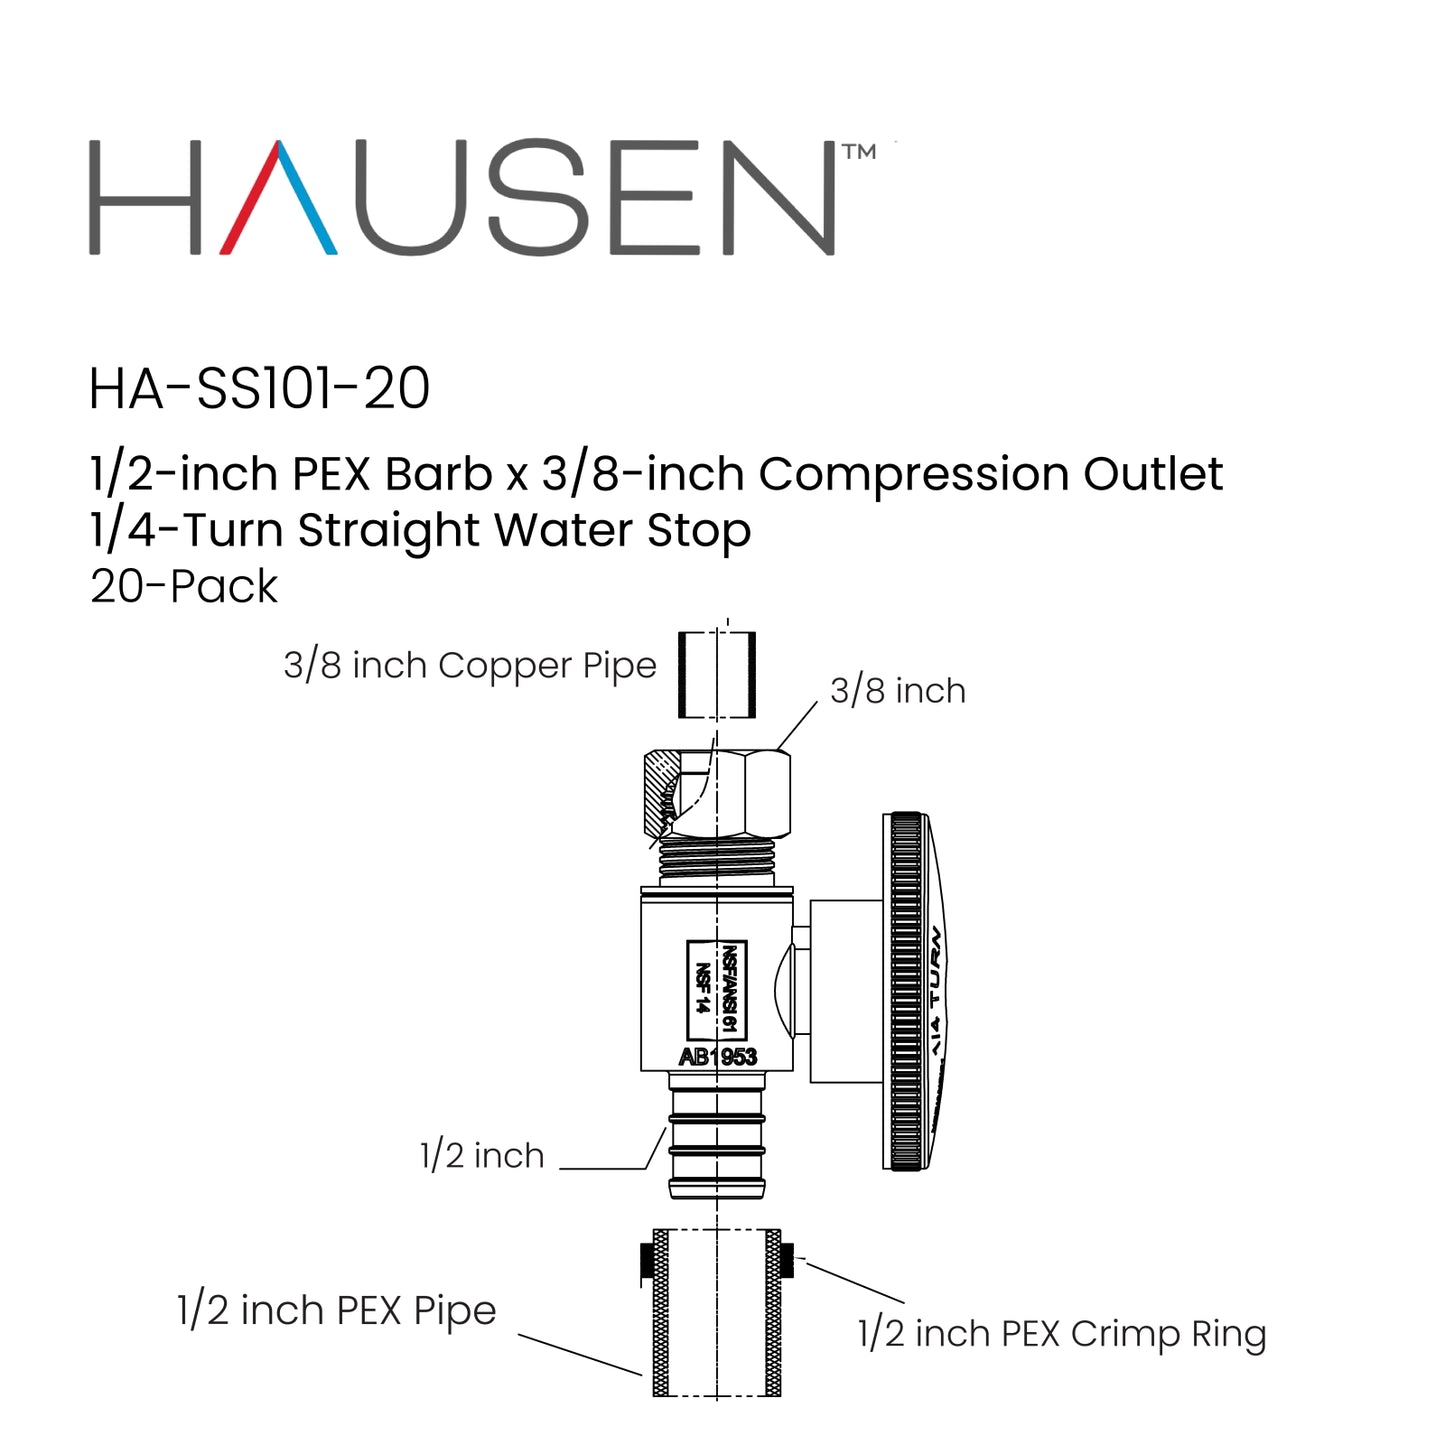 Hausen 1/2-inch PEX Barb x 3/8-inch Compression Outlet 1/4-Turn Straight Water Stop; Lead-Free Forged Brass; Chrome-Plated; cUPC/ANSI/NSF Certified; Compatible with PEX and Copper Piping, 20-Pack